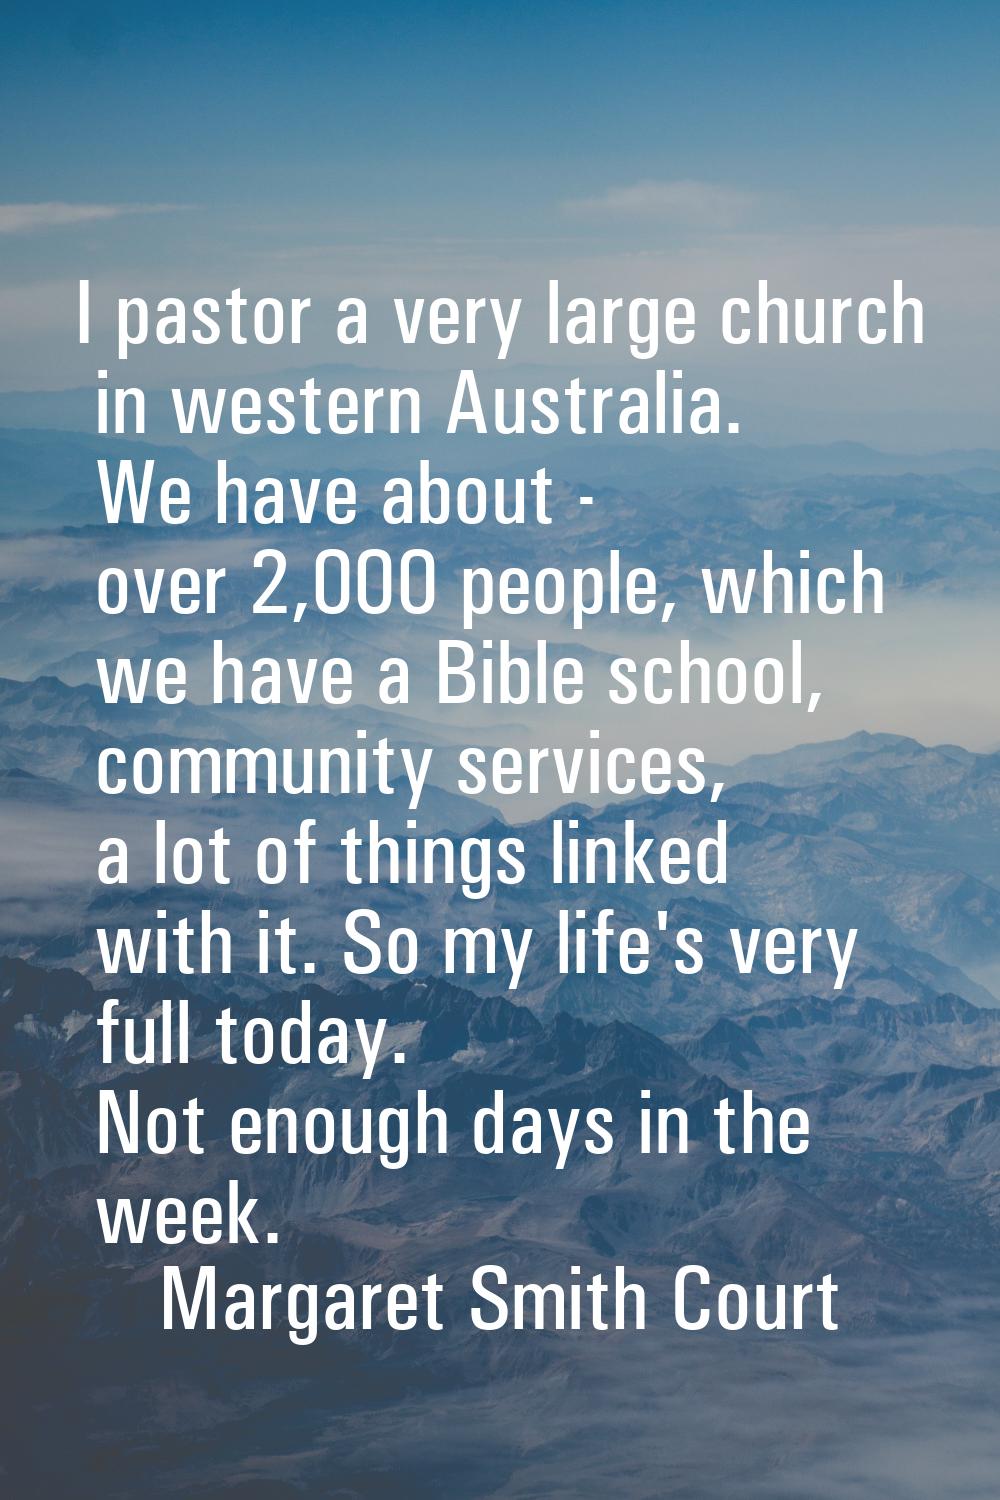 I pastor a very large church in western Australia. We have about - over 2,000 people, which we have